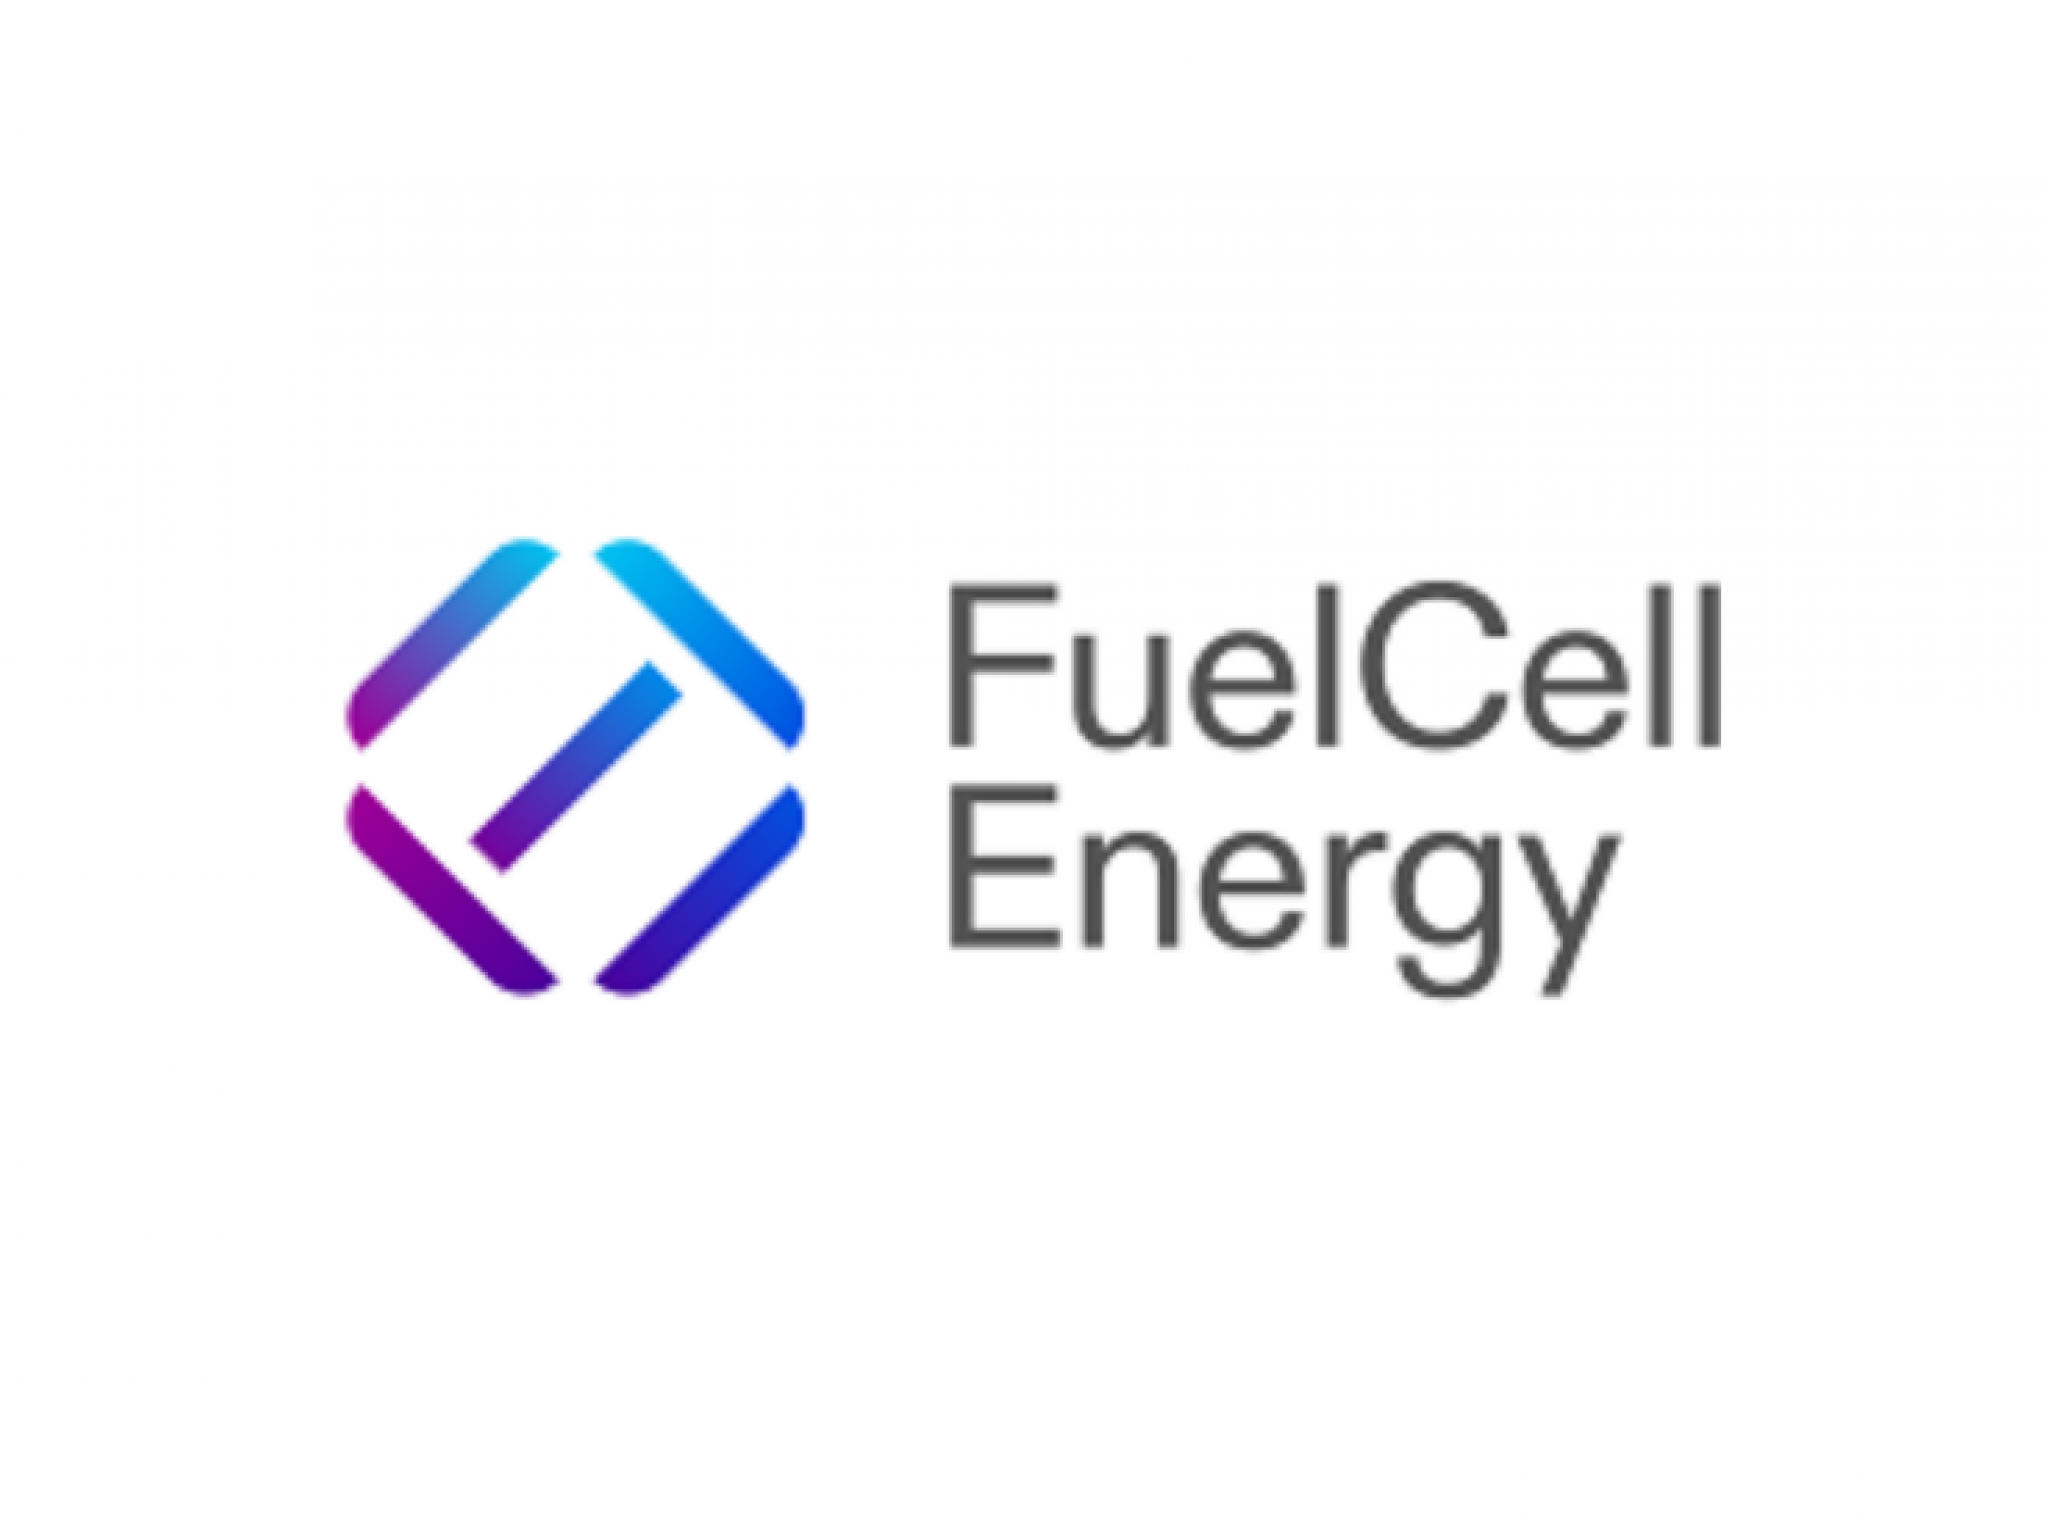  fuelcell-energy-beats-projections-in-q2-fuels-hope-with-new-projects 